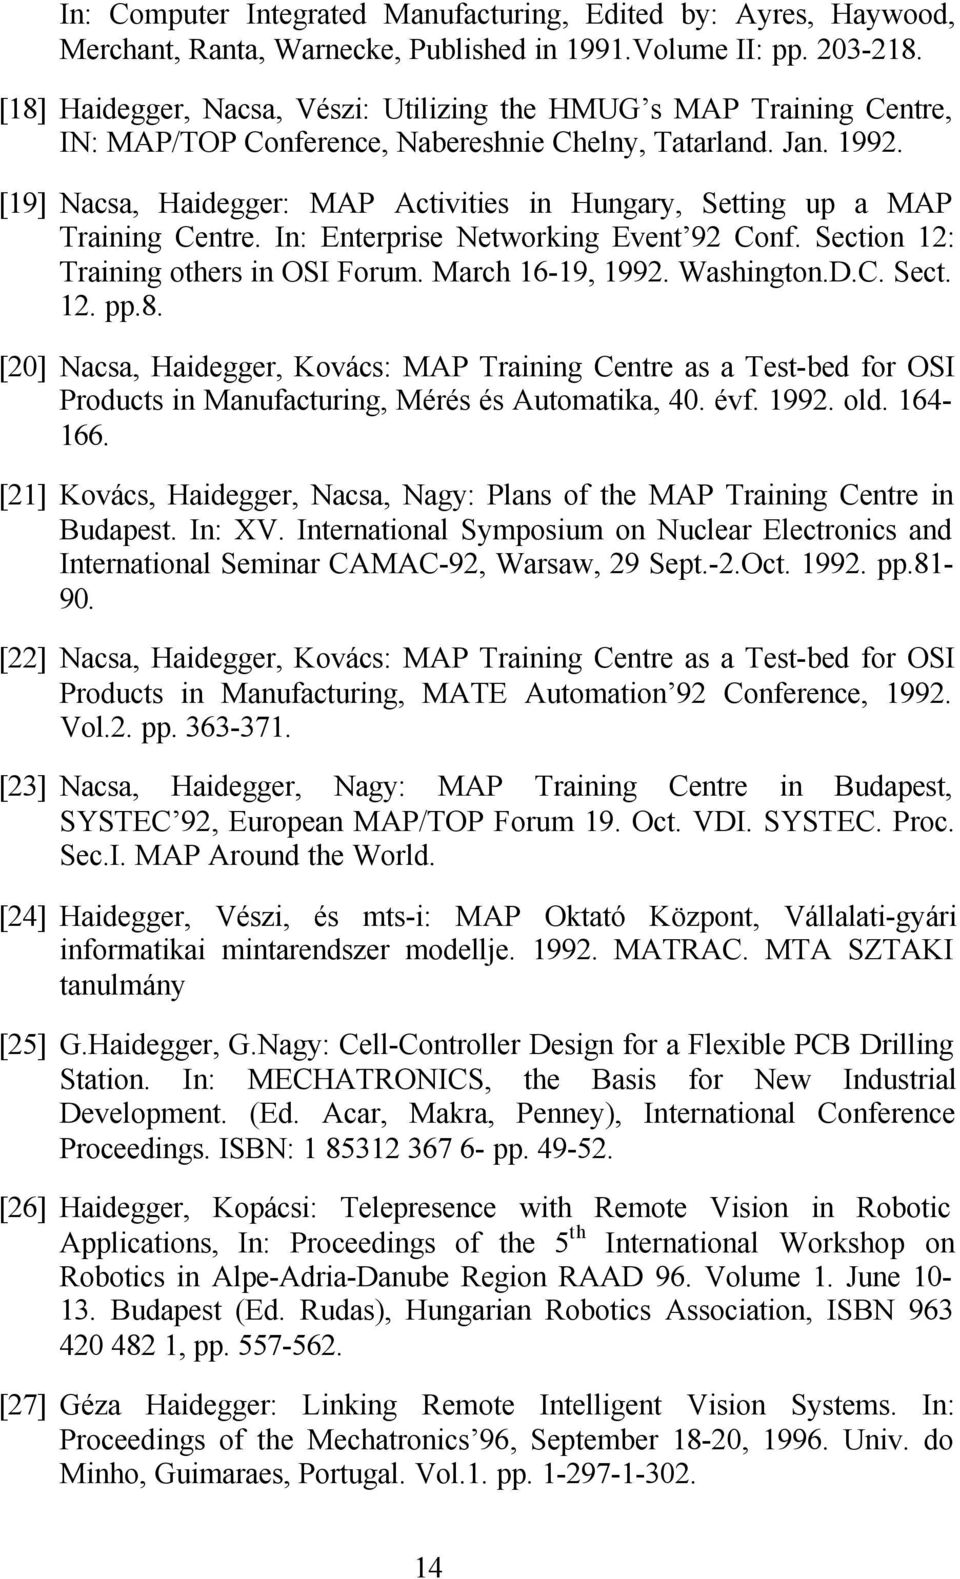 [19] Nacsa, Haidegger: MAP Activities in Hungary, Setting up a MAP Training Centre. In: Enterprise Networking Event 92 Conf. Section 12: Training others in OSI Forum. March 16-19, 1992. Washington.D.